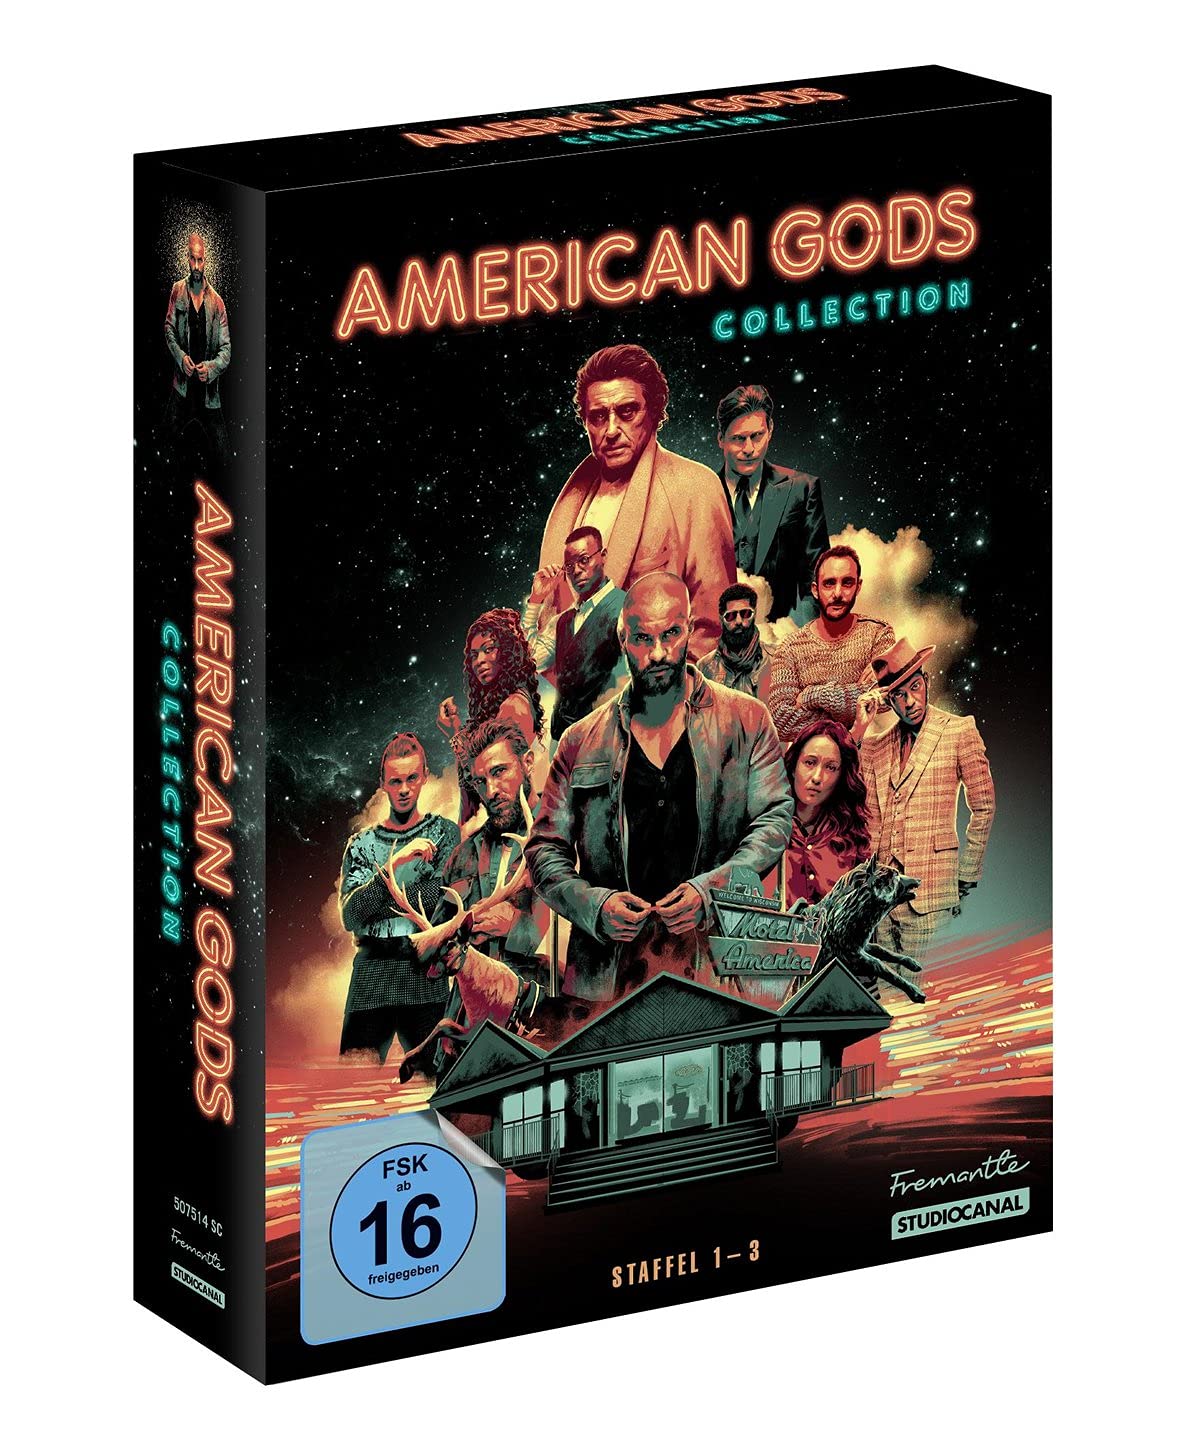 American Gods - Collection - Staffel 1-3 (11 DVDs) Image 2